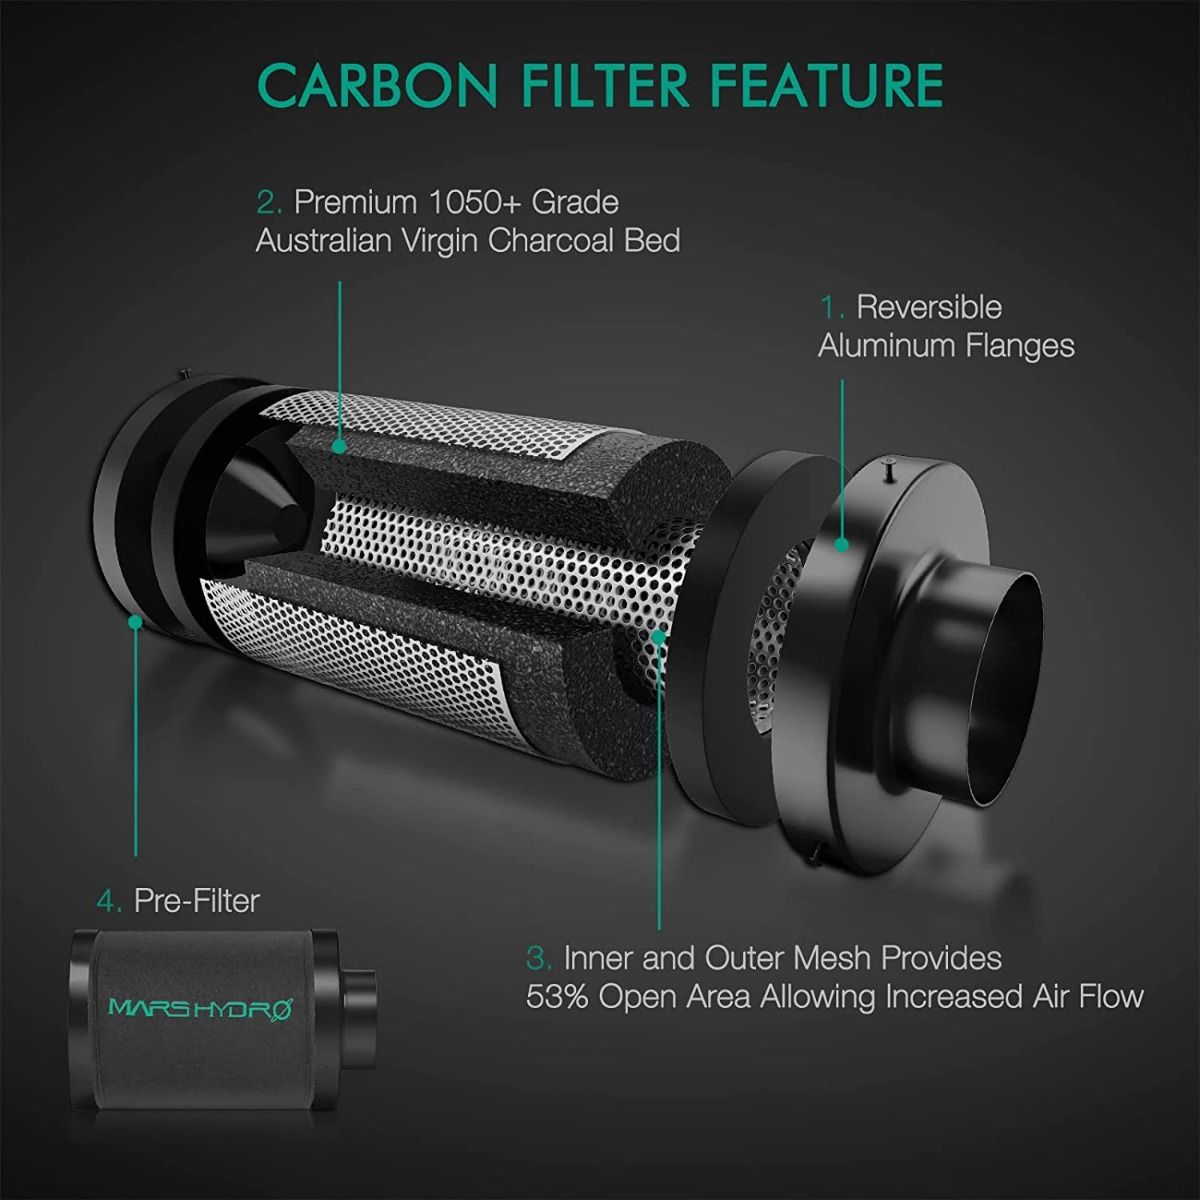 Mars Hydro Grow Kits - 4 / 6 inch Inline Duct Fan and Carbon Filter Combo with Thermostat Controller